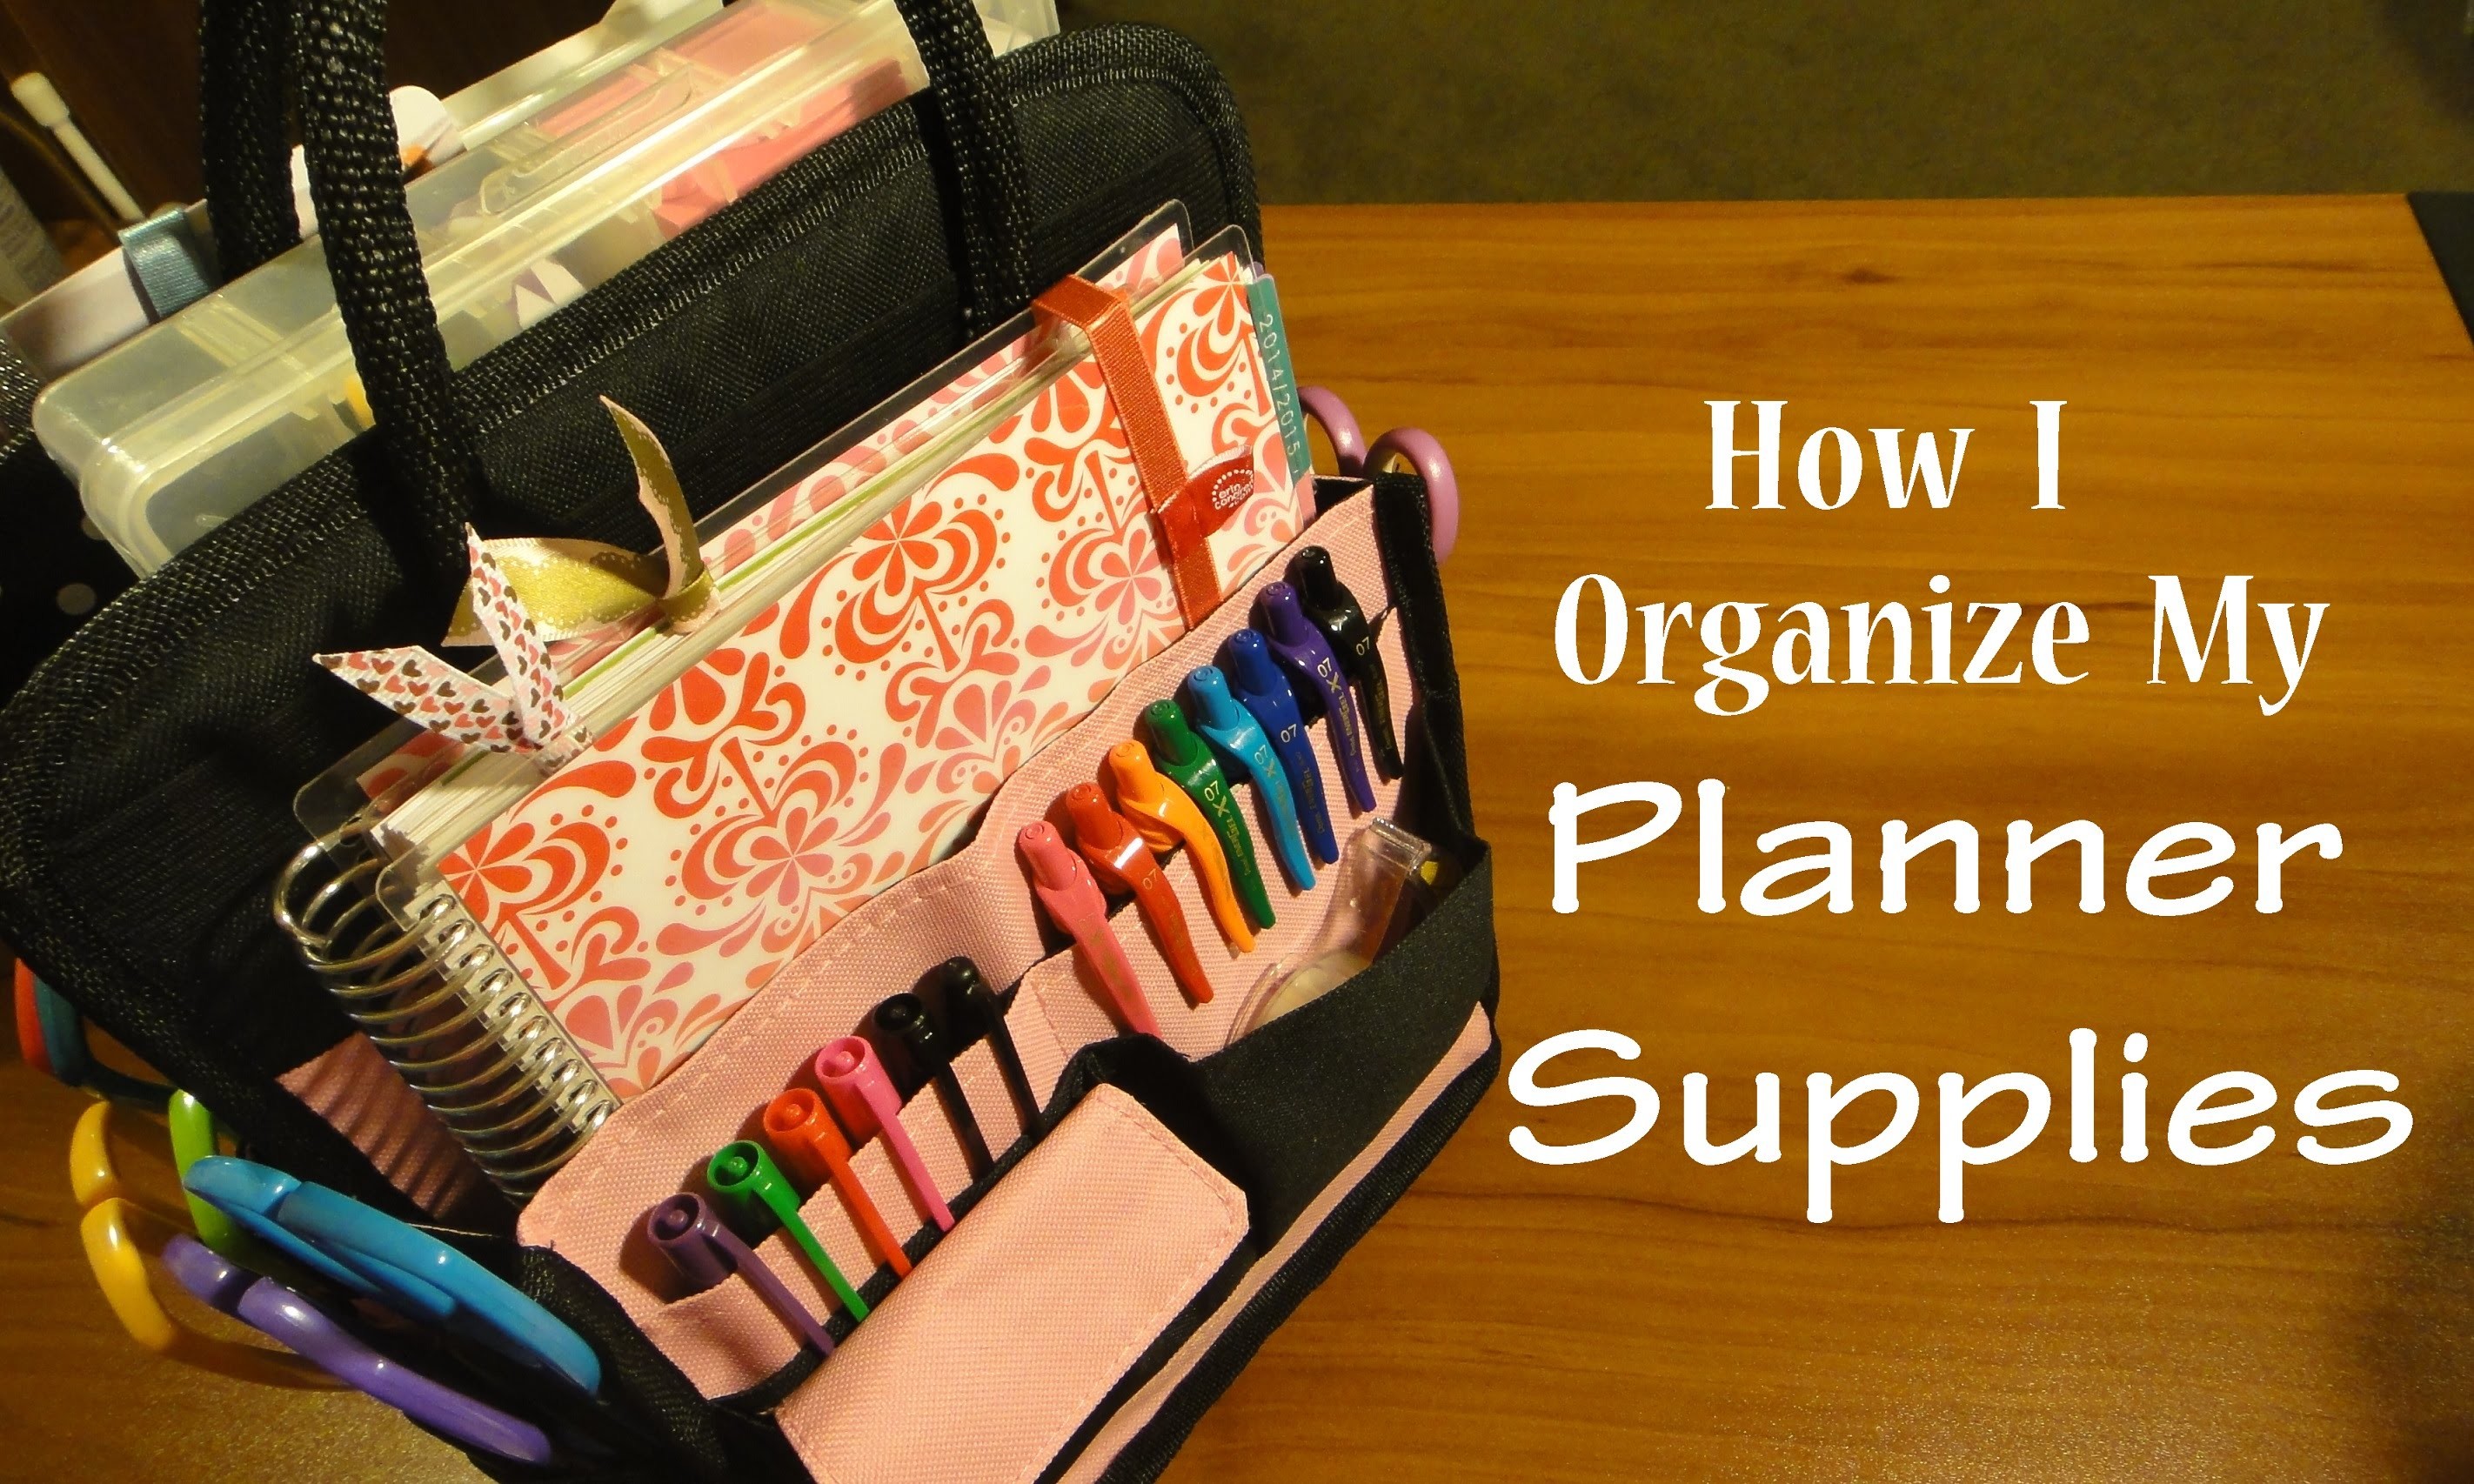 How to organize